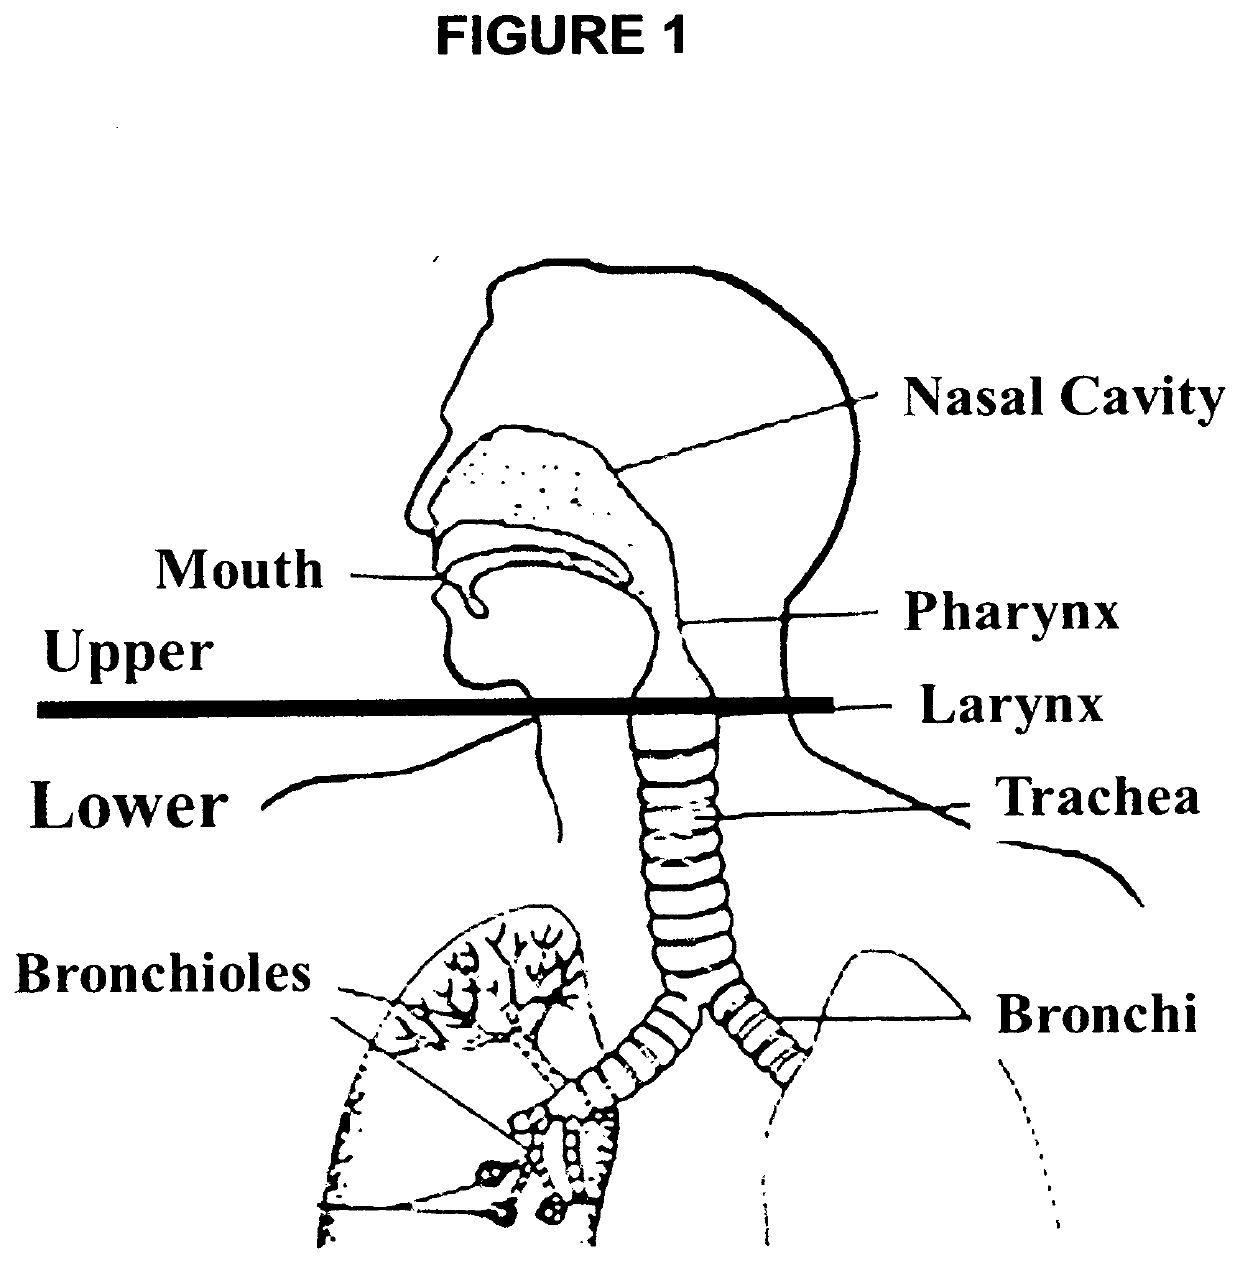 Treatment of airway disorders and cough